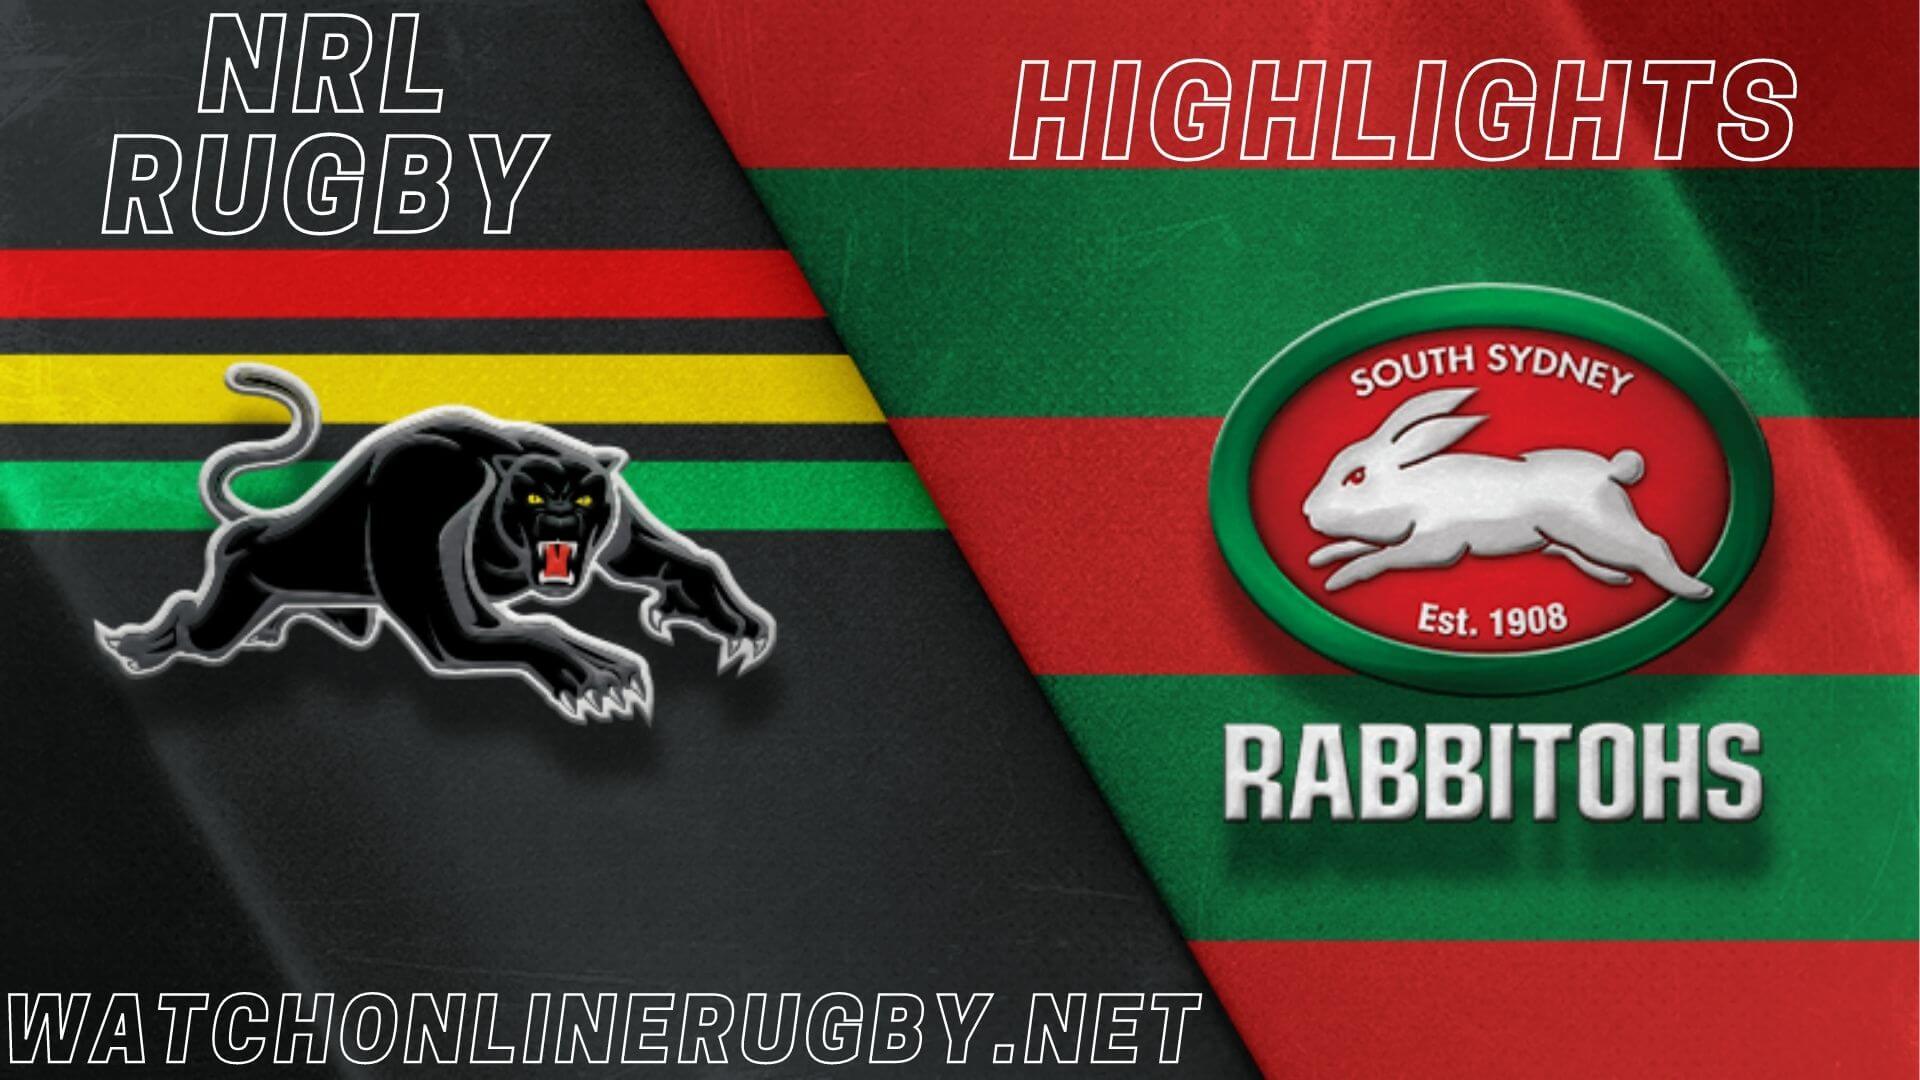 Panthers Vs Rabbitohs Highlights RD 4 NRL Rugby